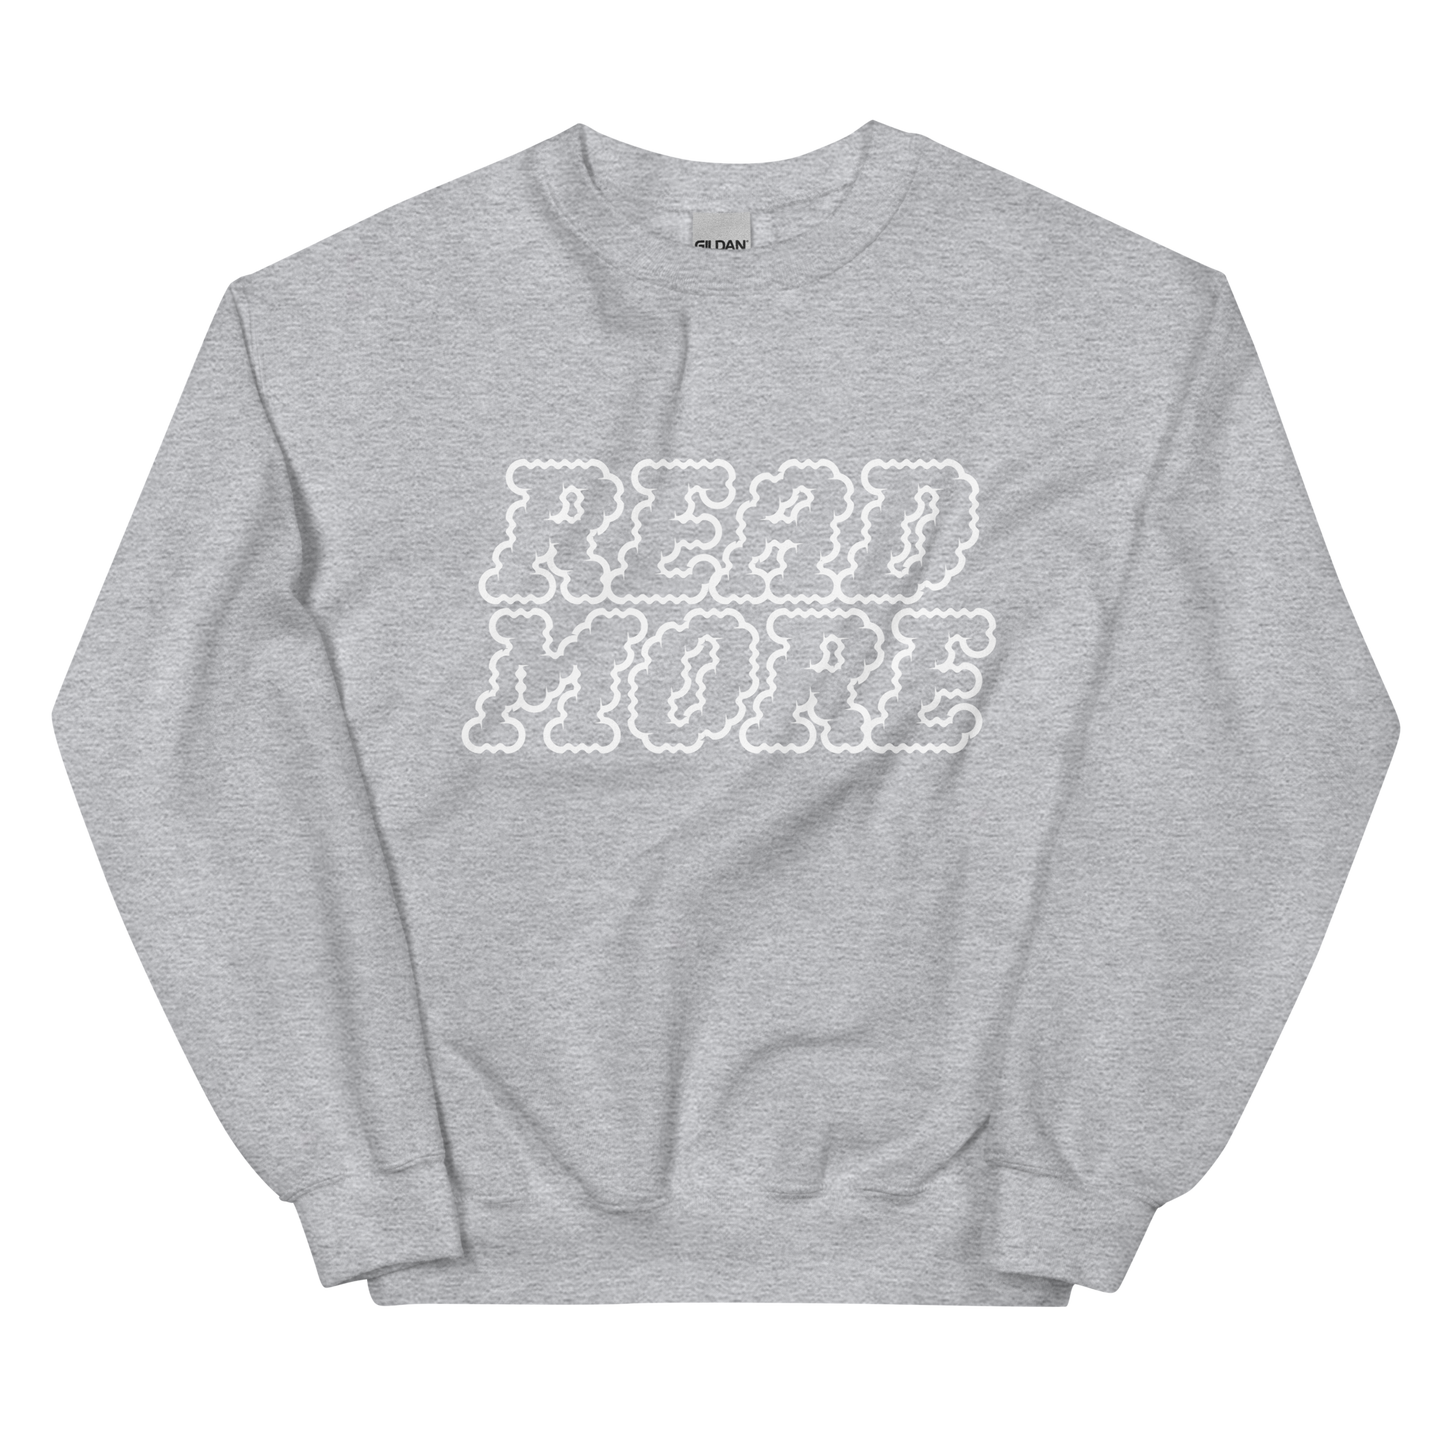 Read More Crewneck Sweatshirt (available in black, grey, and pink!)